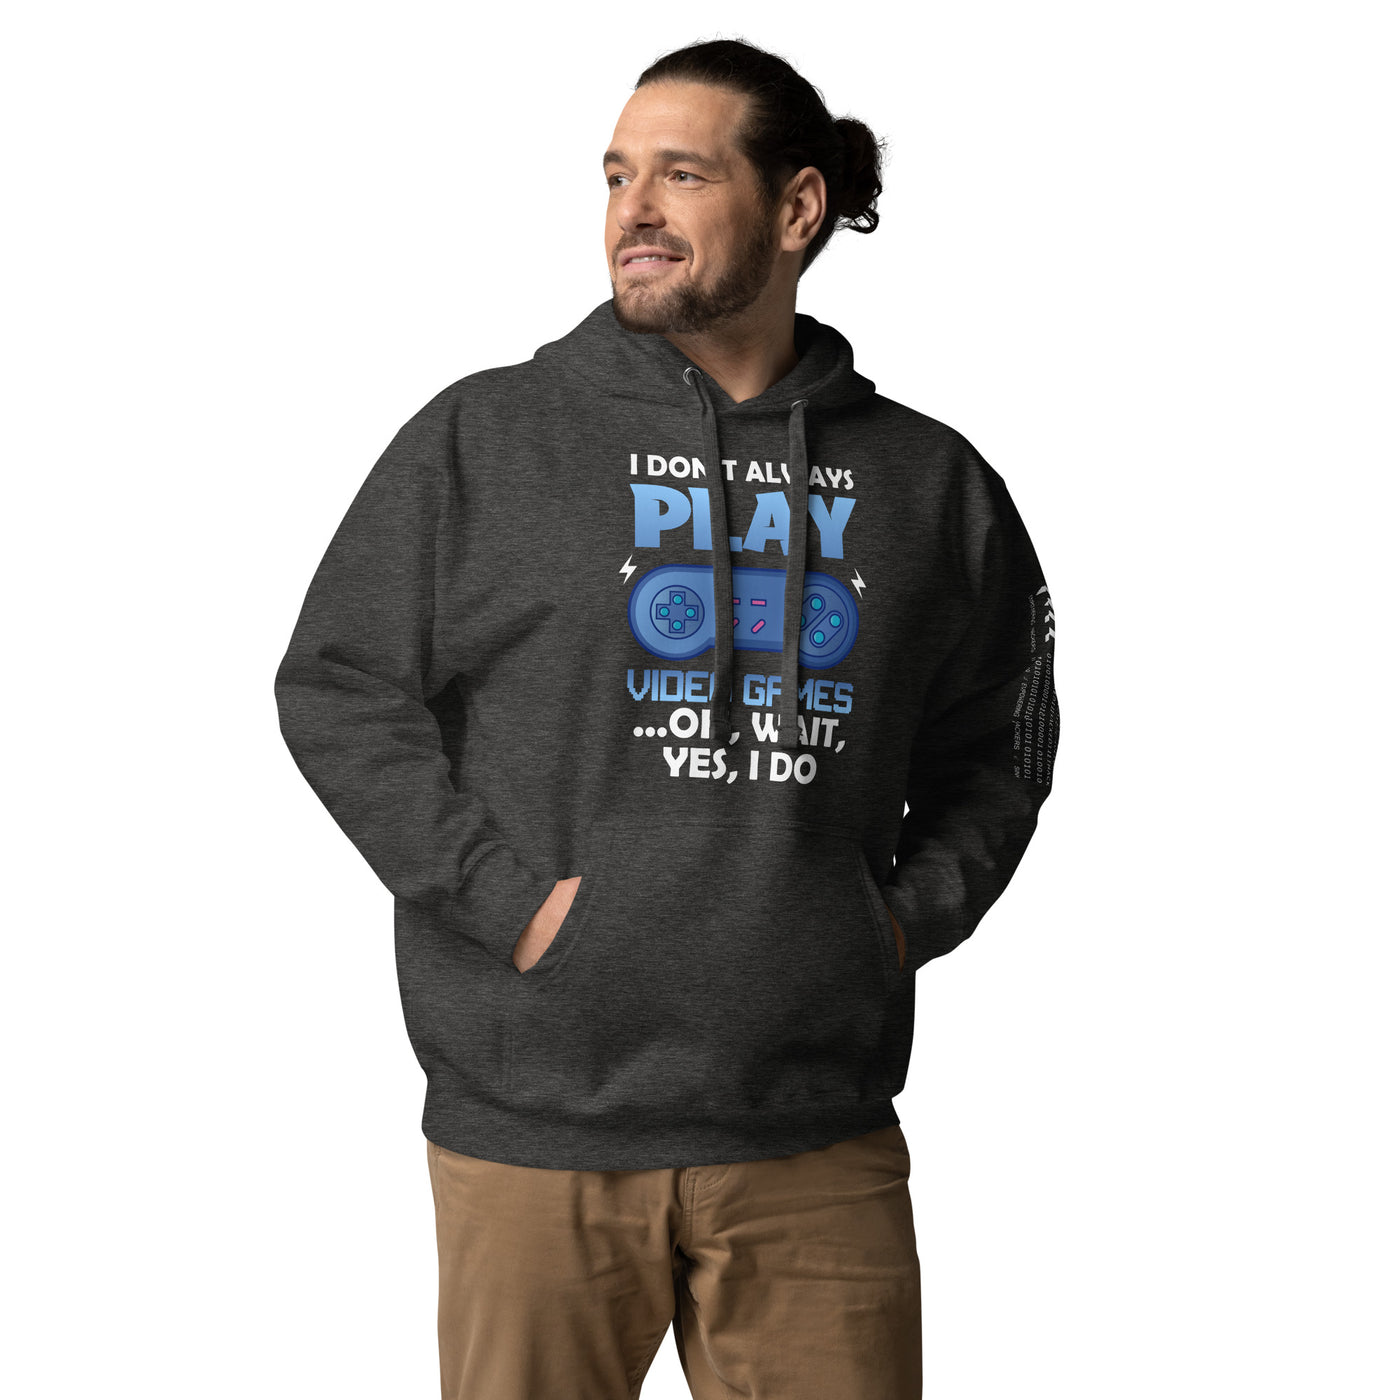 I don't always Play Video Game; Oh, Wait! Yes, I do - Unisex Hoodie